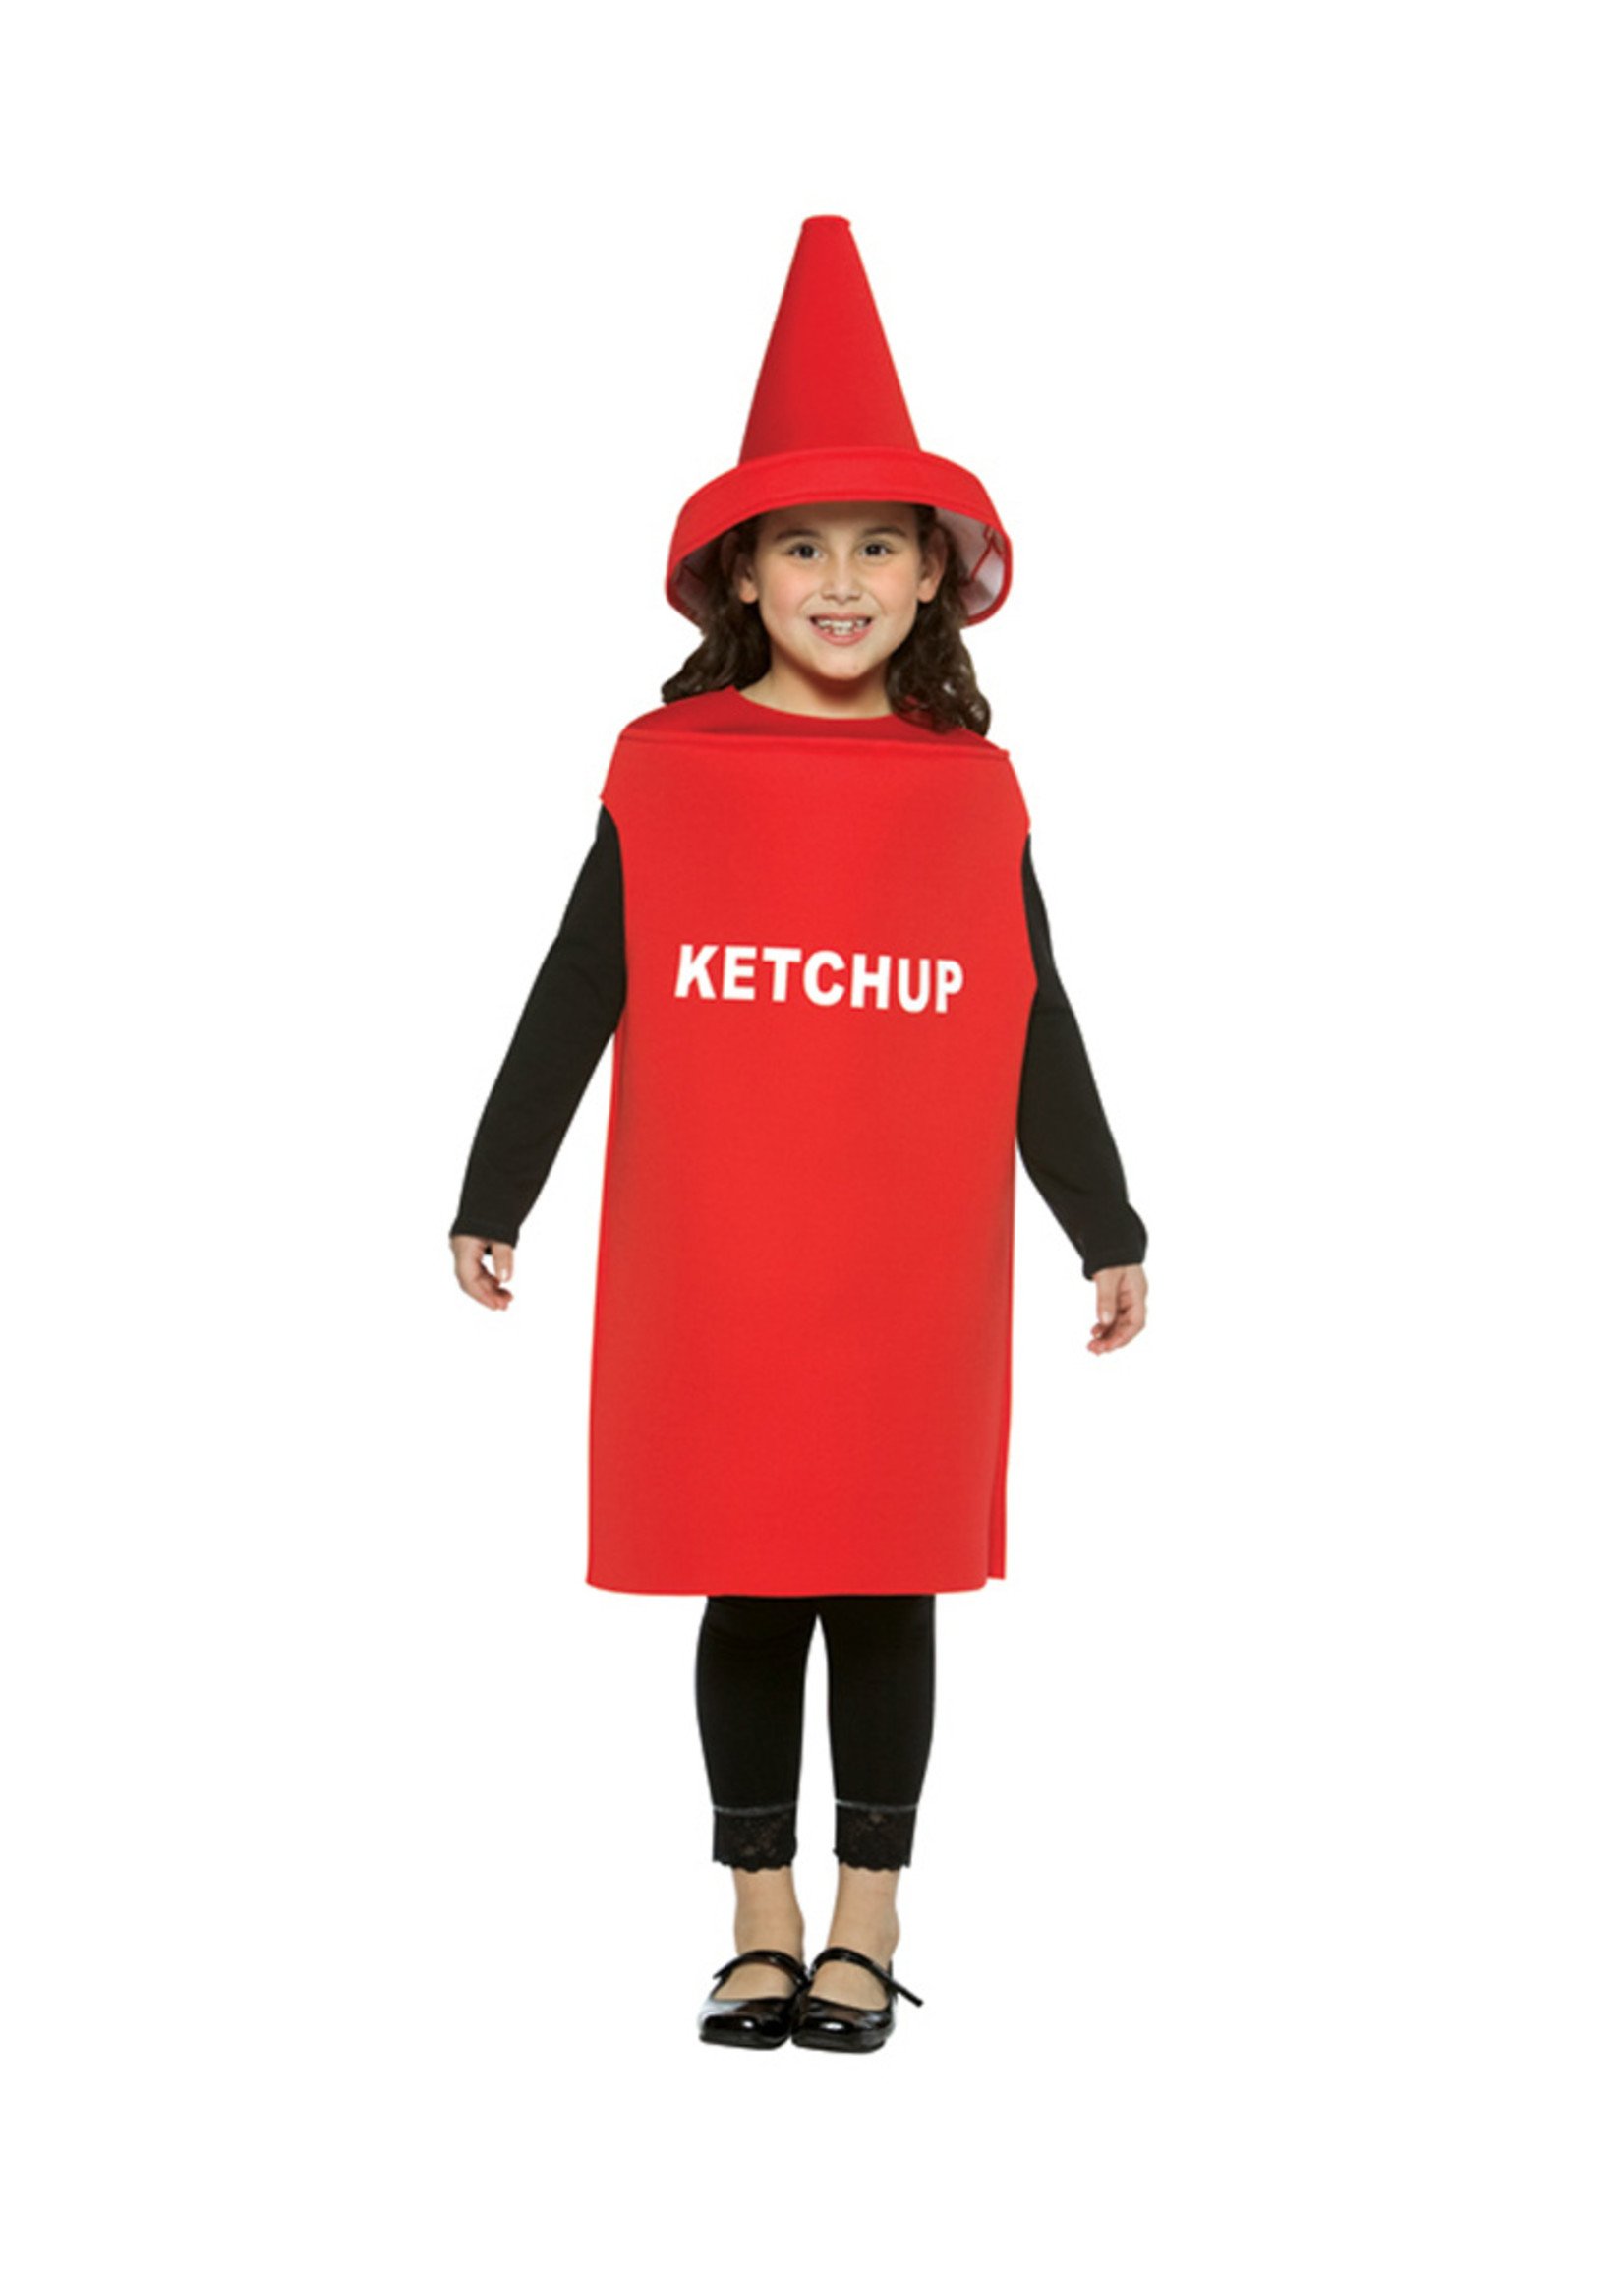 Ketchup Costume - Child